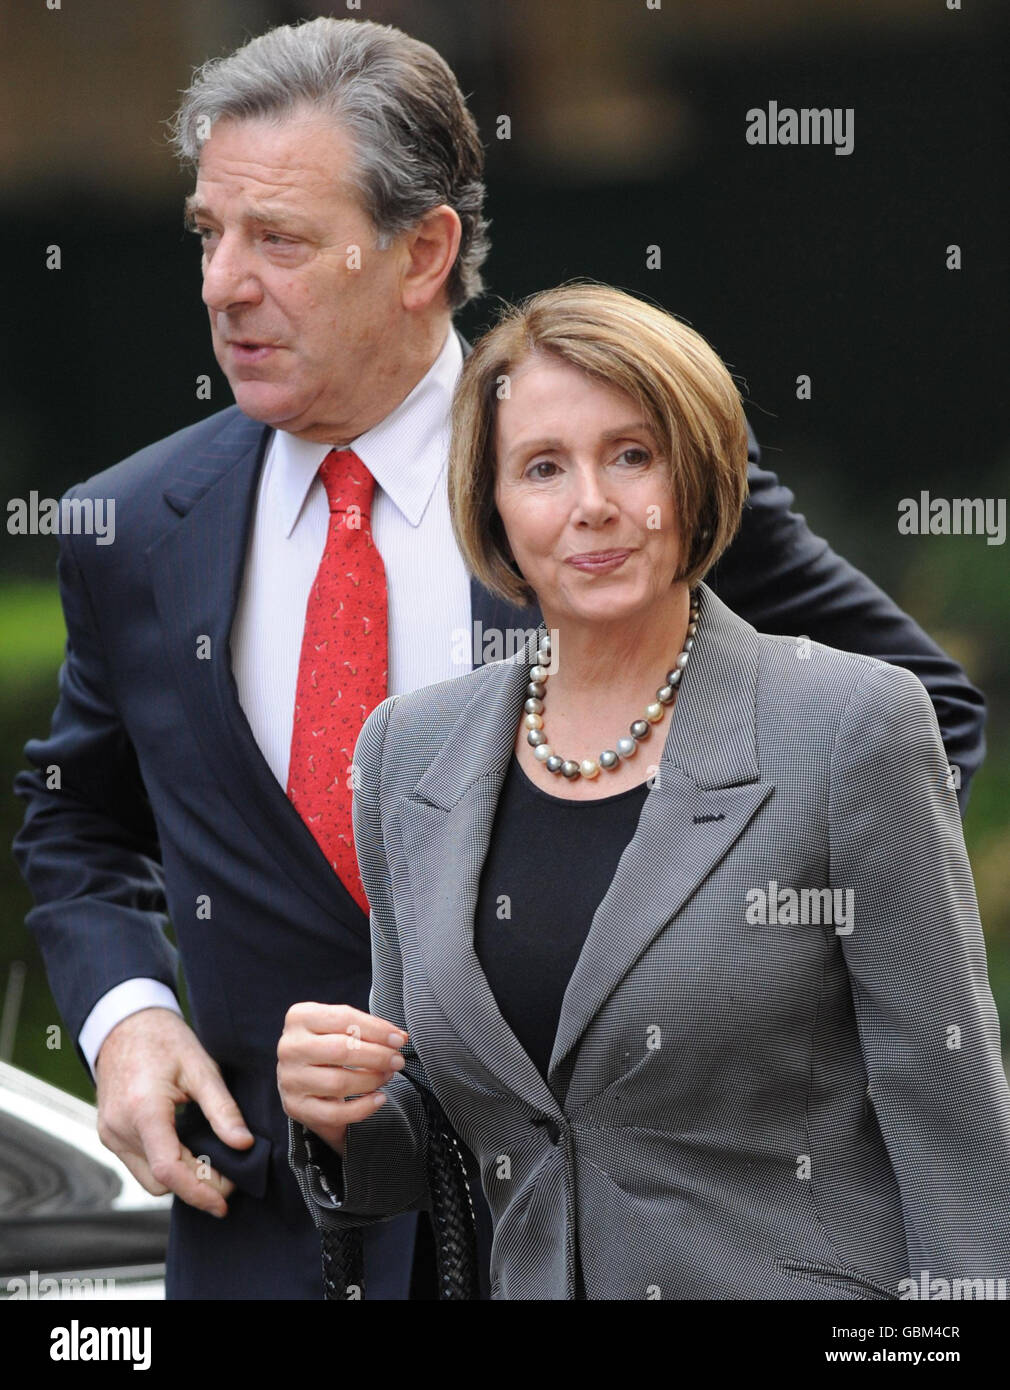 Speaker of The U.S. House of Representatives Nancy Pelosi and her husband Paul arrive at Downing Street for a meeting with the Prime Minister. Stock Photo